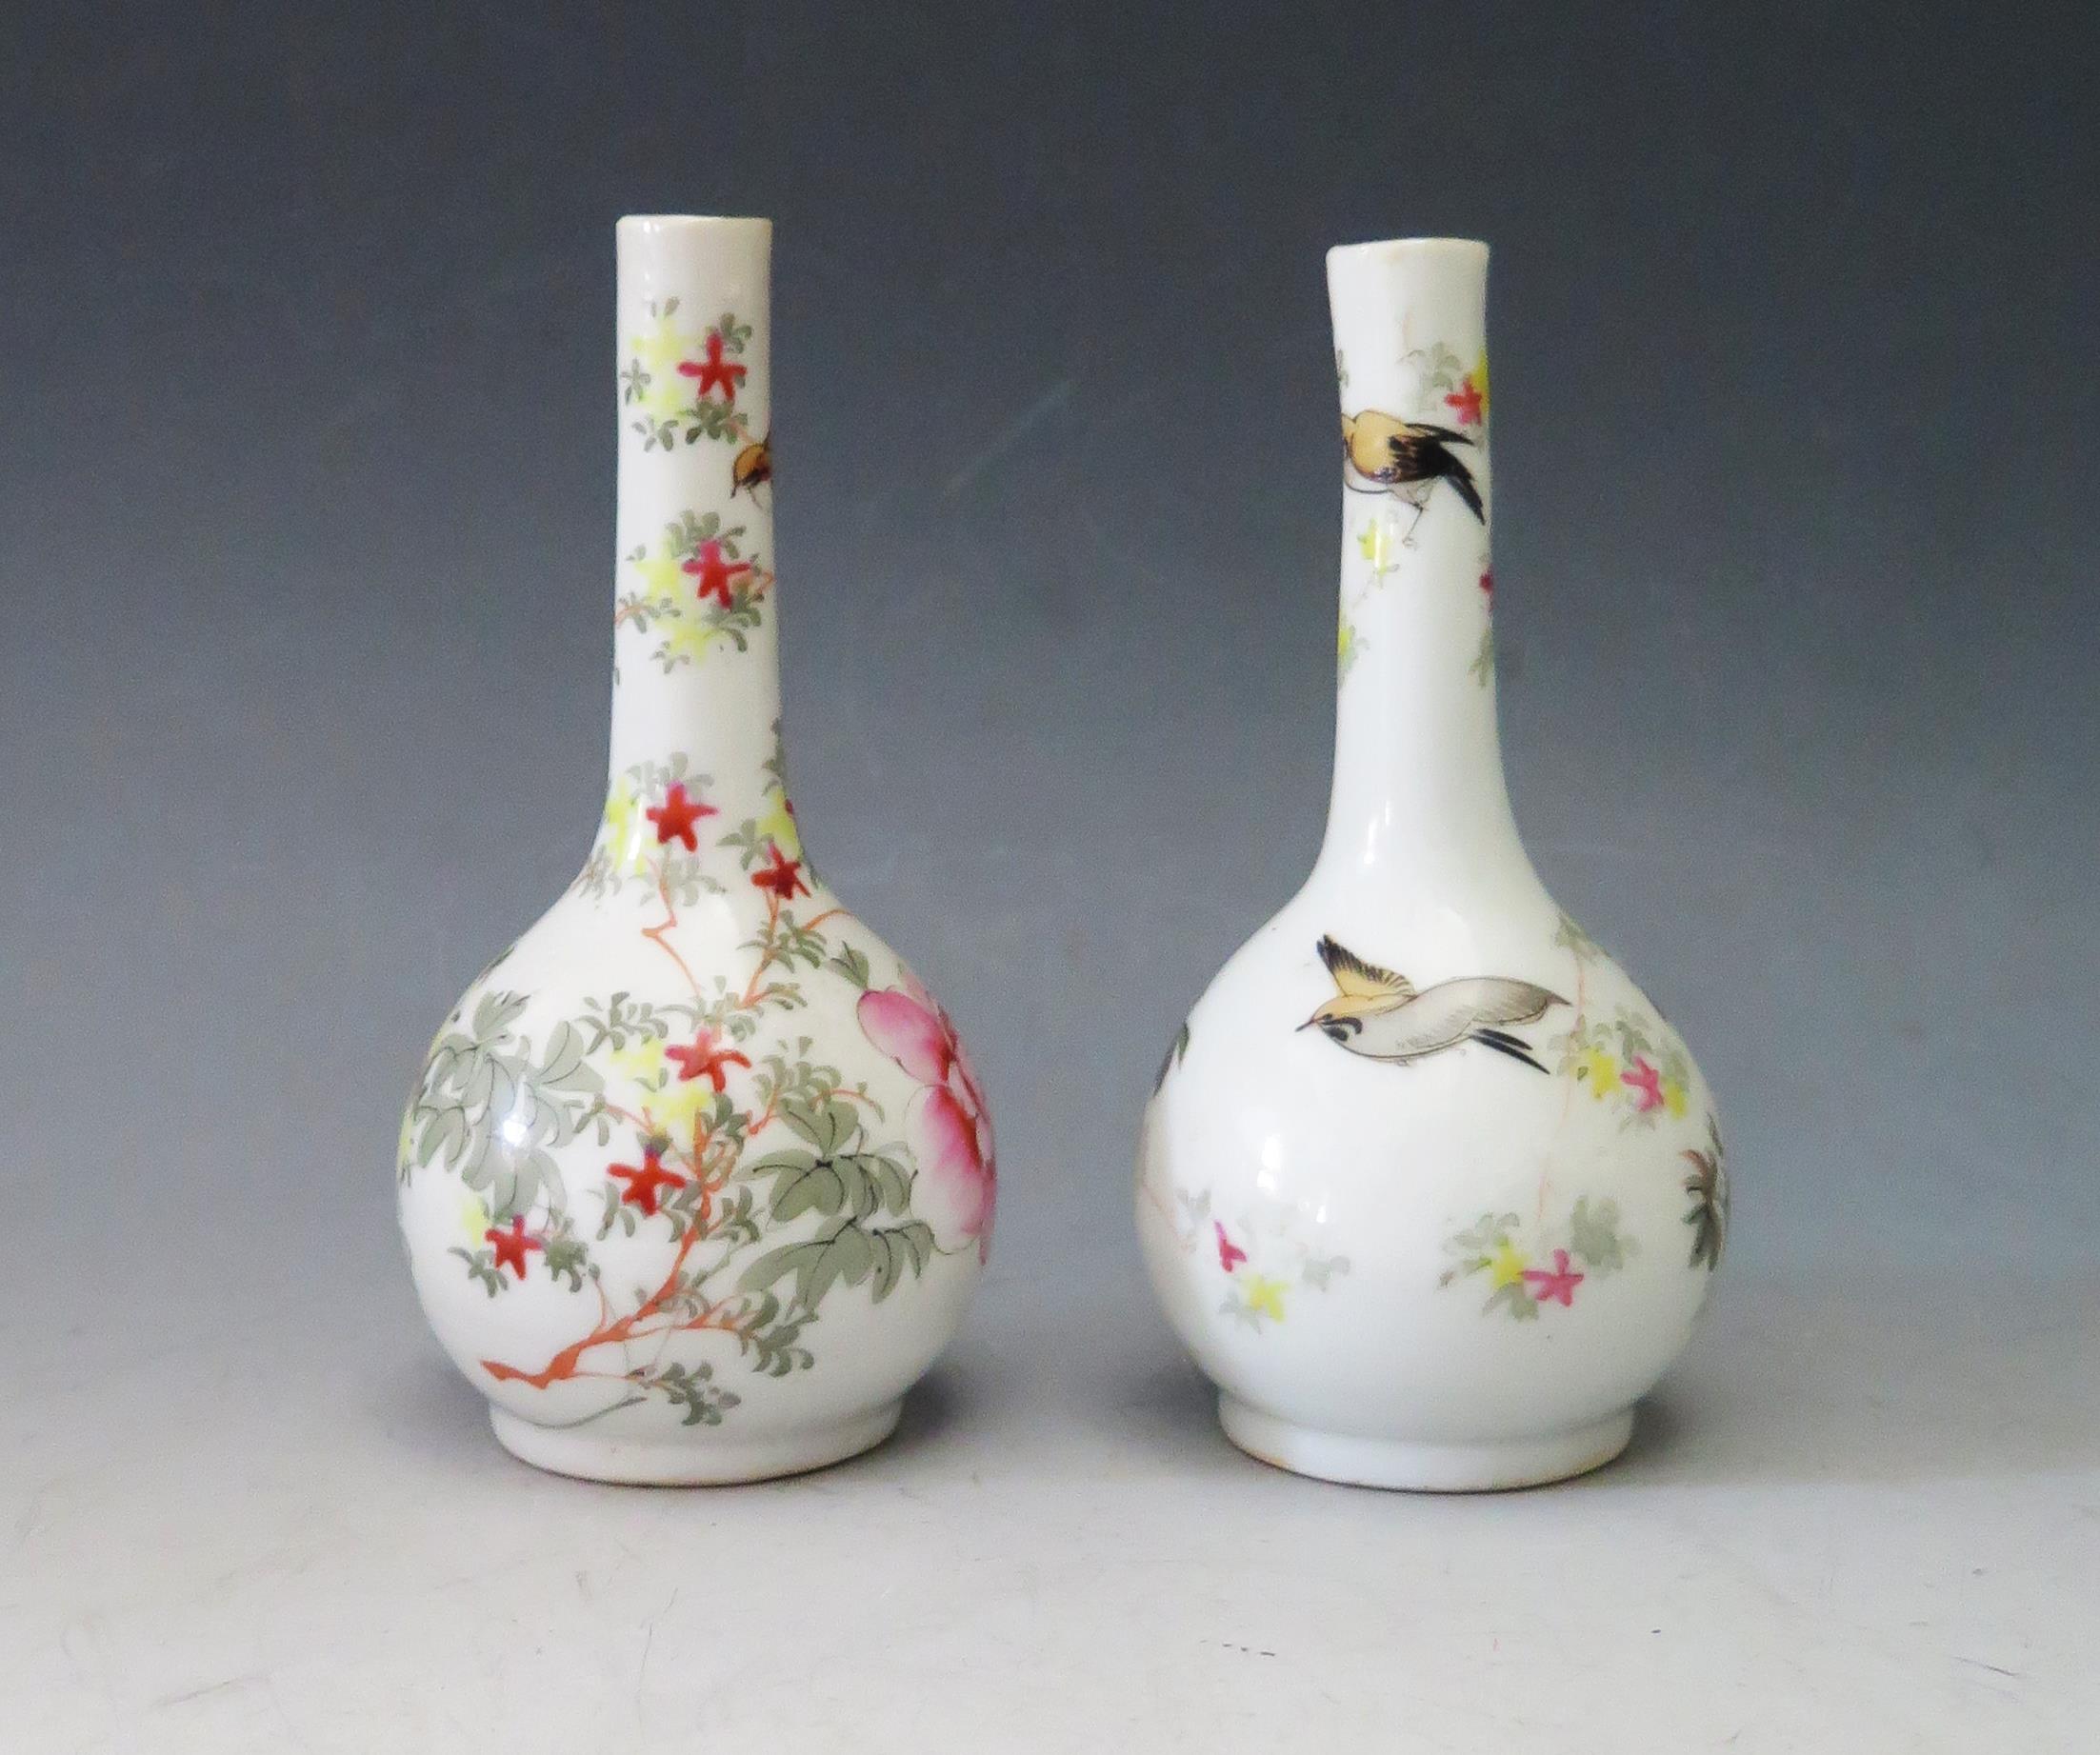 A Pair of Antique Japanese Porcelain Pinch Neck Vases with foliate and bird decoration, marks to